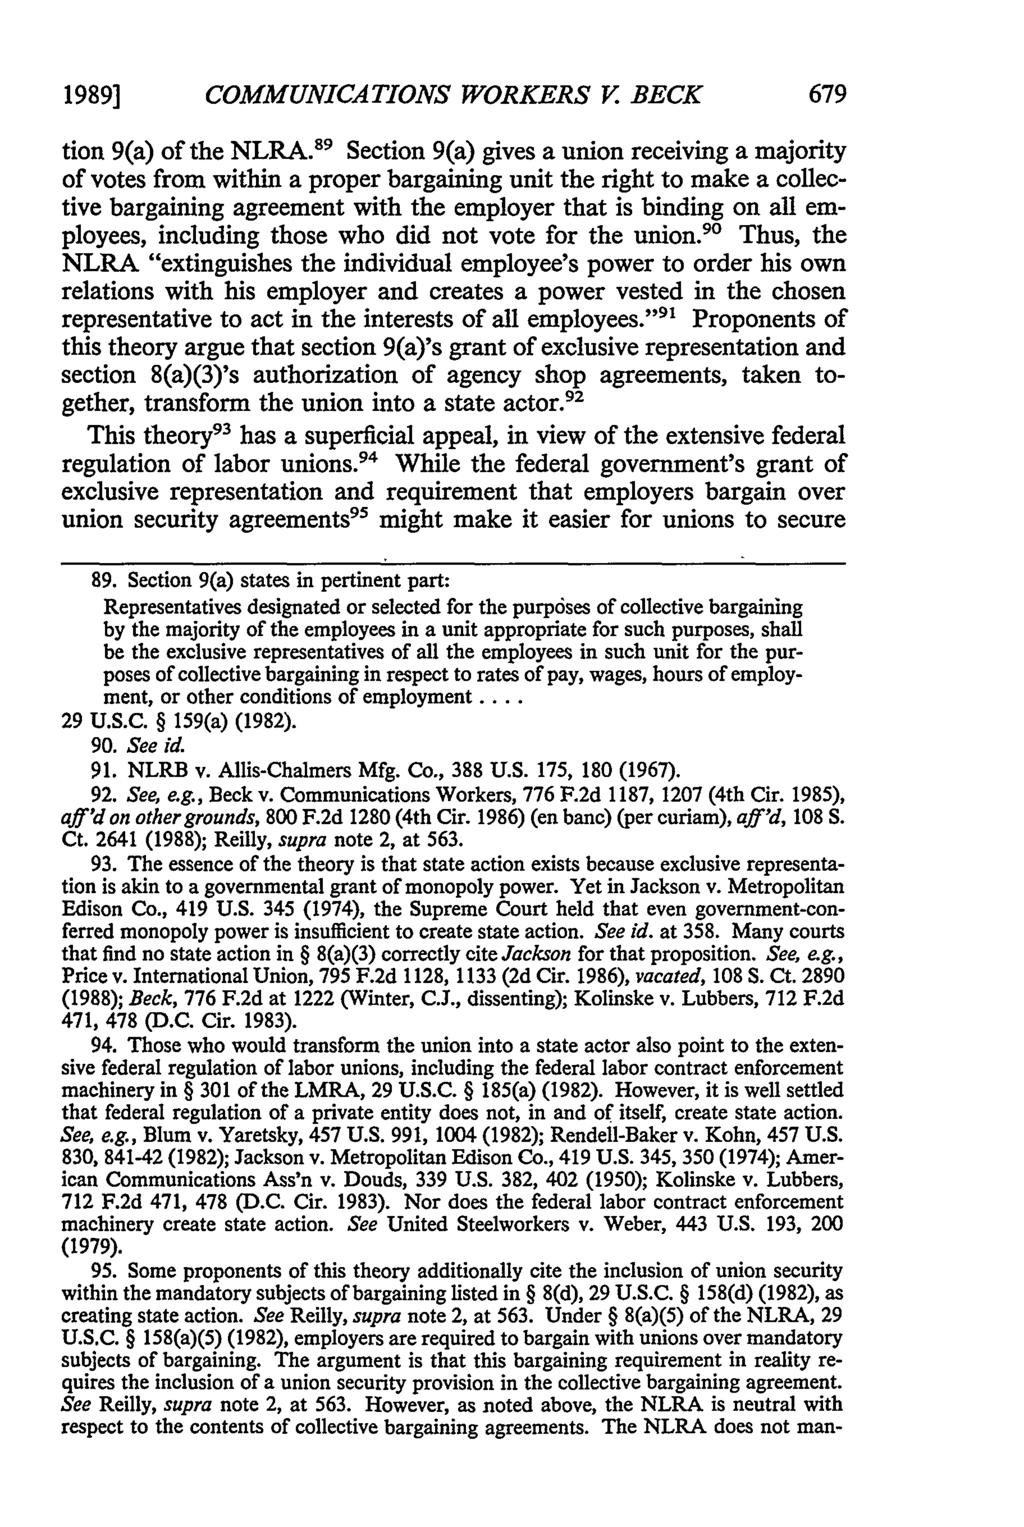 1989] COMMUNICATIONS WORKERS V BECK tion 9(a) of the NLRA.